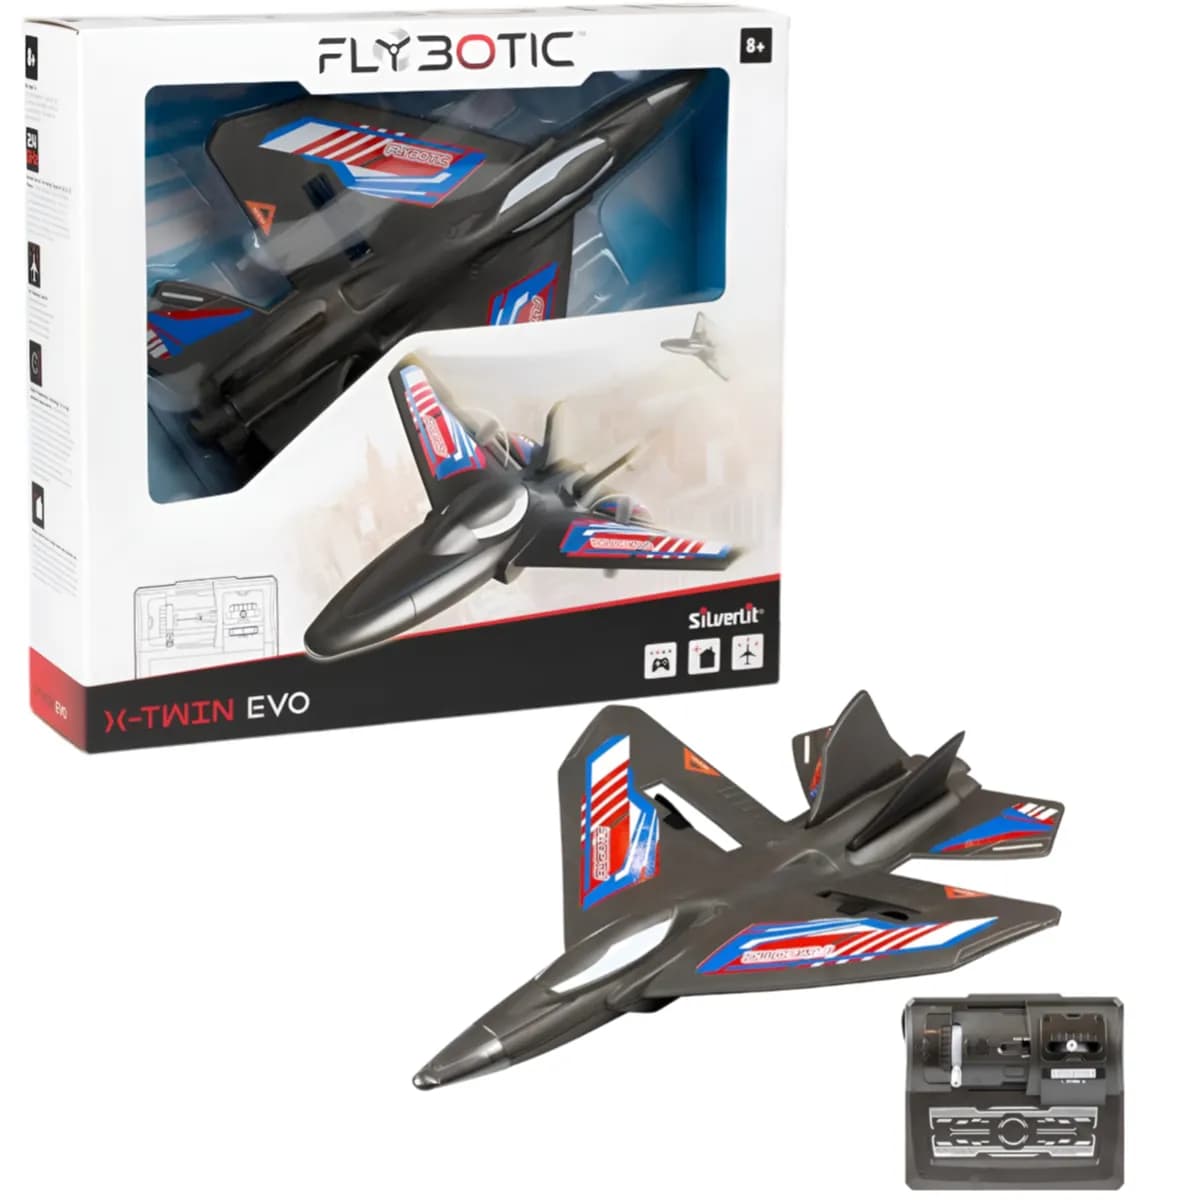 Silverlit Remote Control X Twin Evo Flybotic Aircraft -  Assorted Colors -(DEFS11)